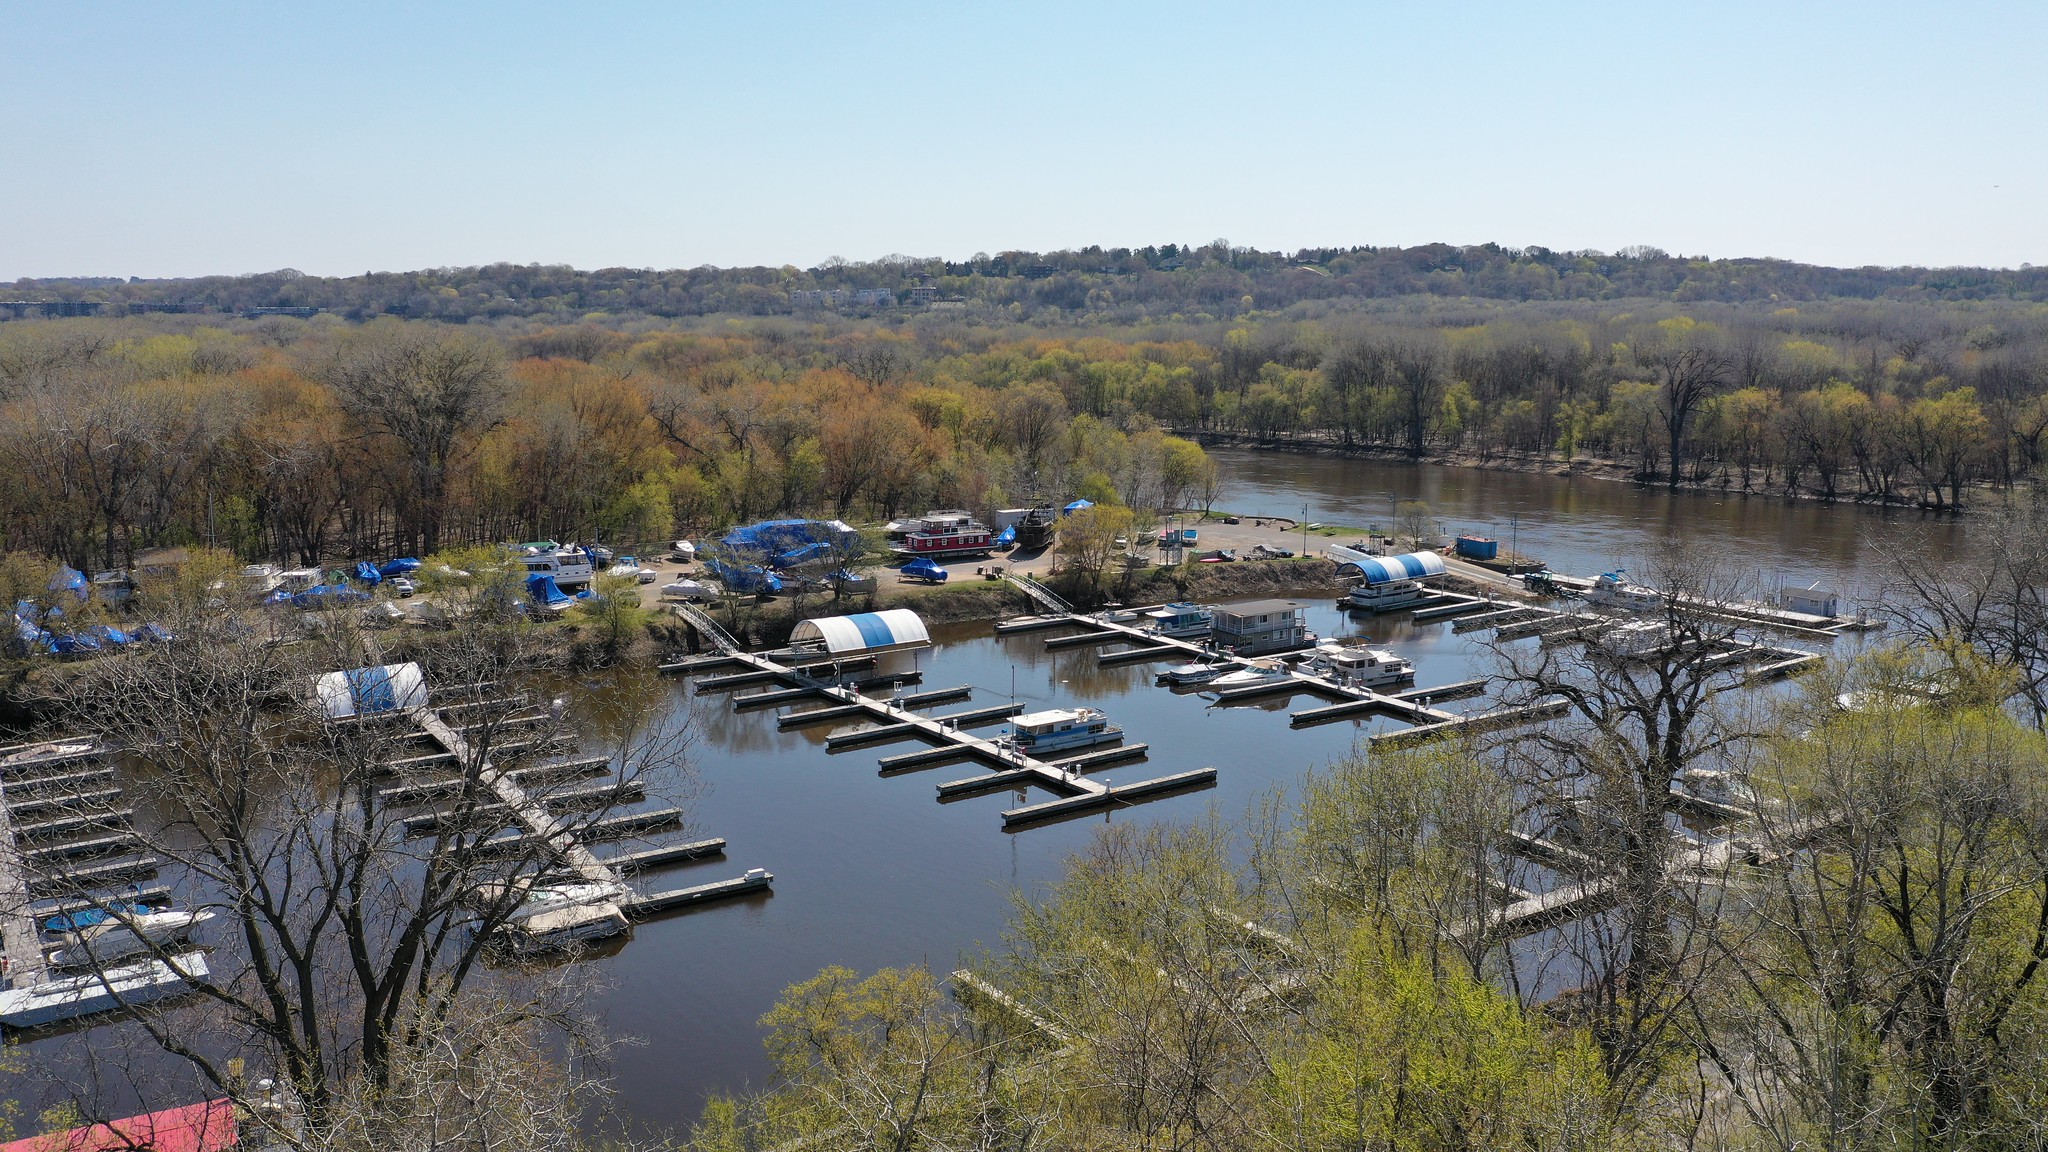 An overhead view of boats in the harbor at Watergate Marina.